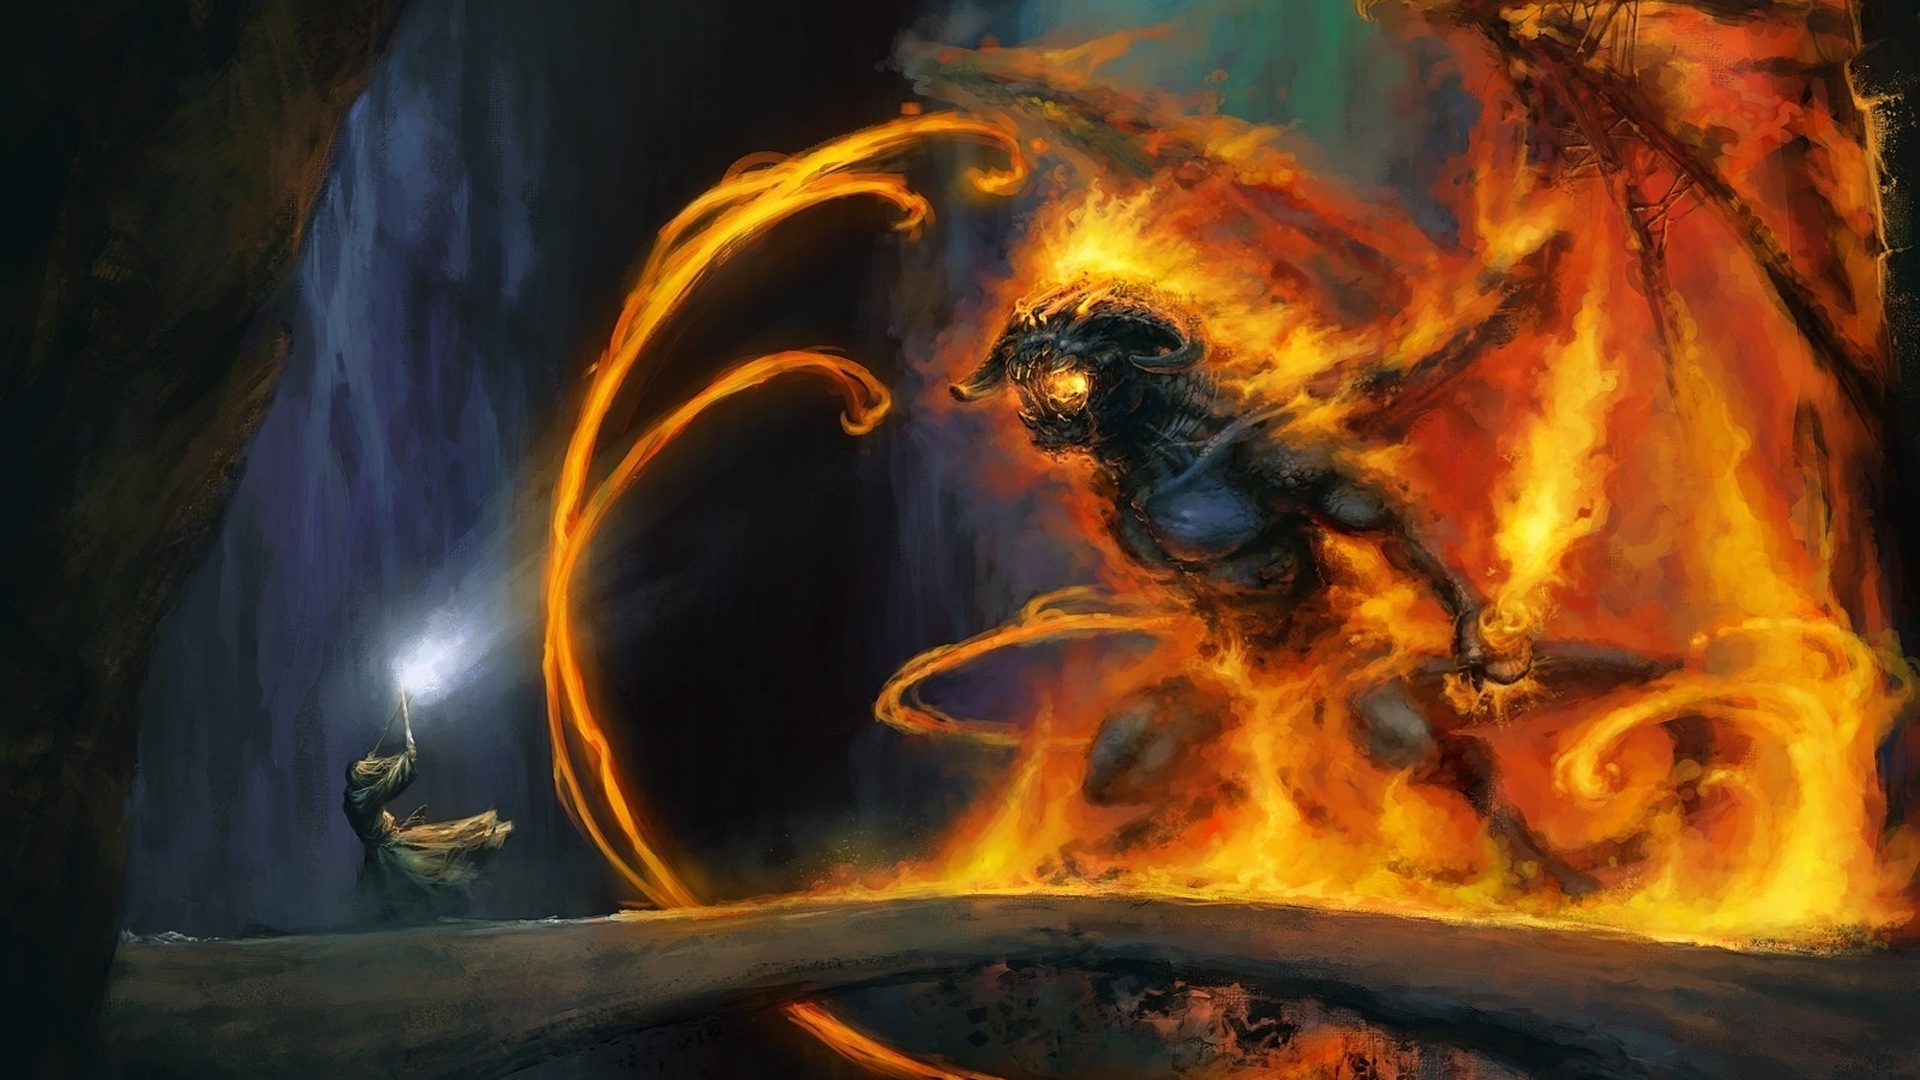 Gandalf battles a demon in a fiery painting titled Thou shall not pass!.